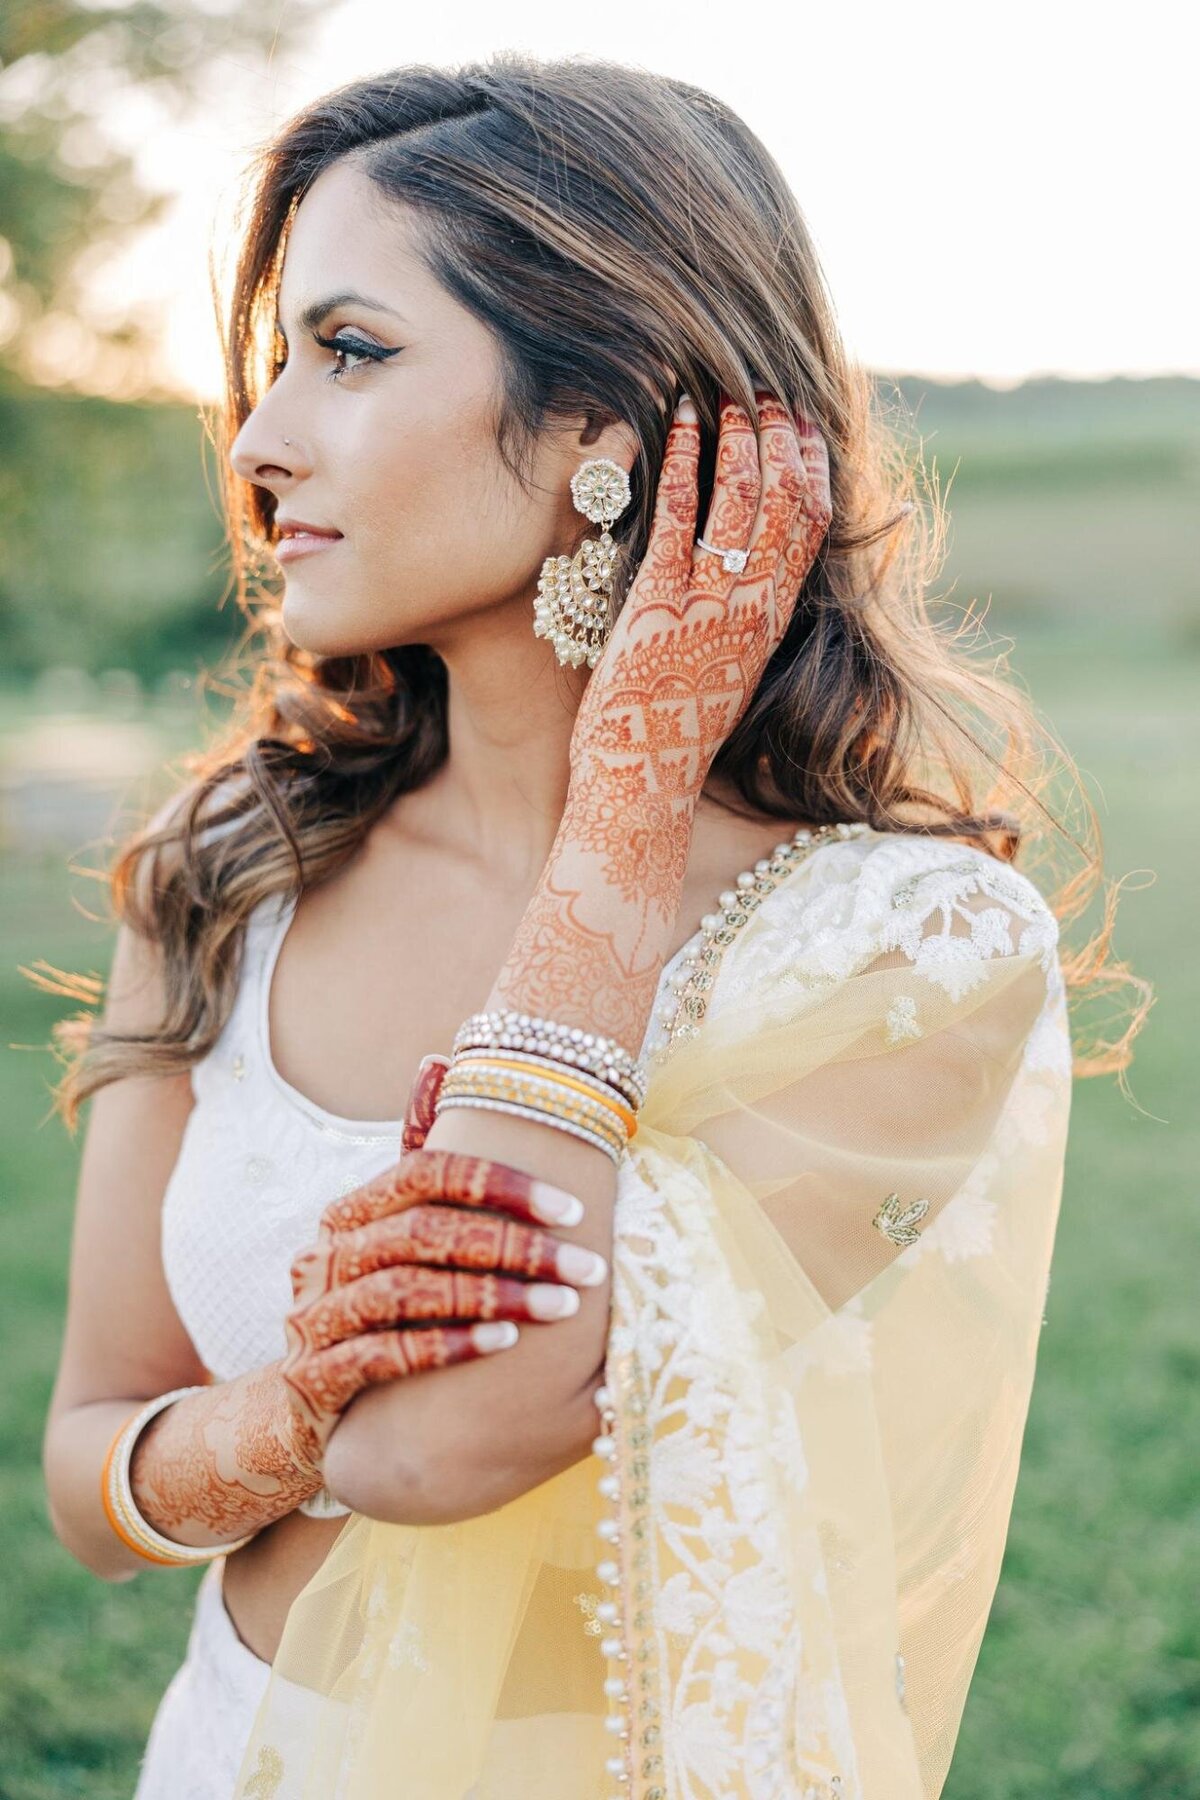 A woman adorned with henna and traditional jewelry looks away pensively.